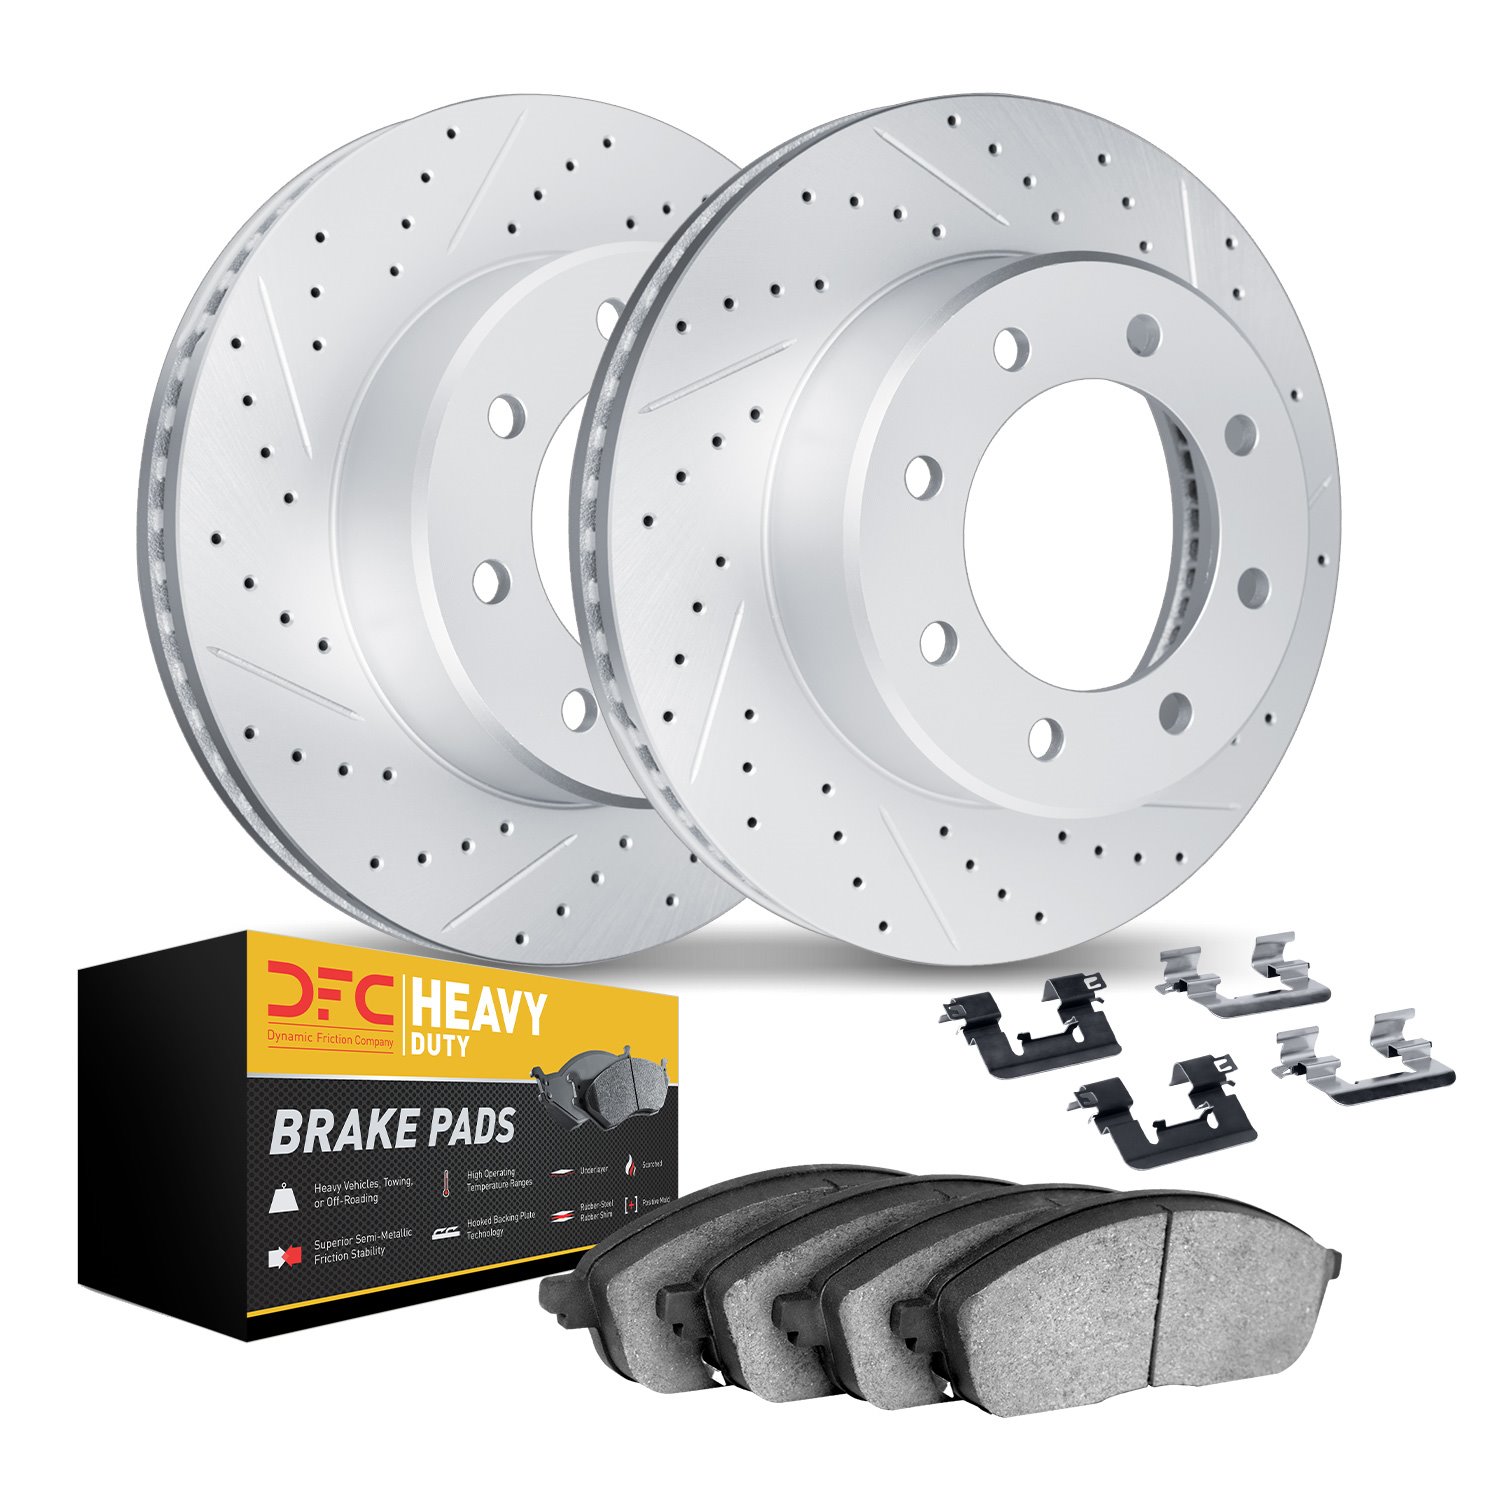 2212-99157 Geoperformance Drilled/Slotted Rotors w/Heavy-Duty Pads Kit & Hardware, 2005-2010 Ford/Lincoln/Mercury/Mazda, Positio